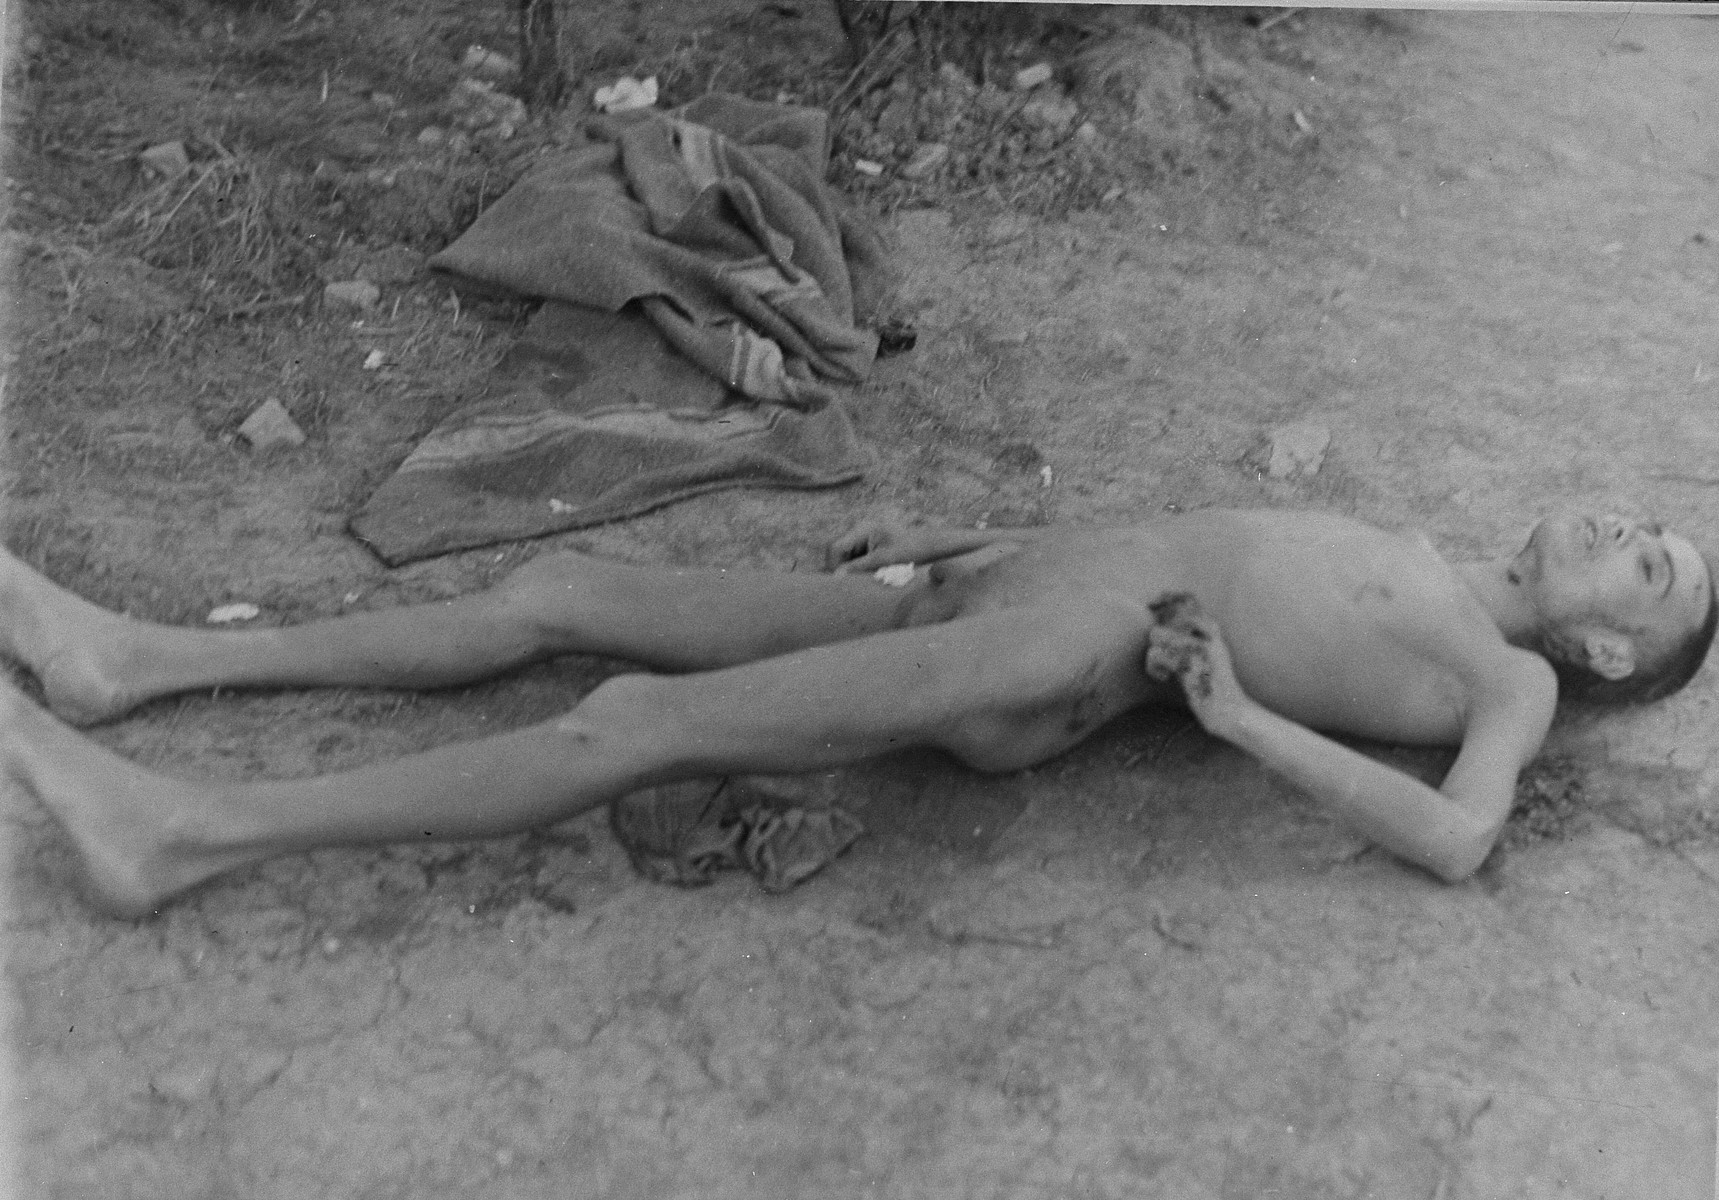 The corpse of a dead prisoner in Ohrdruf.